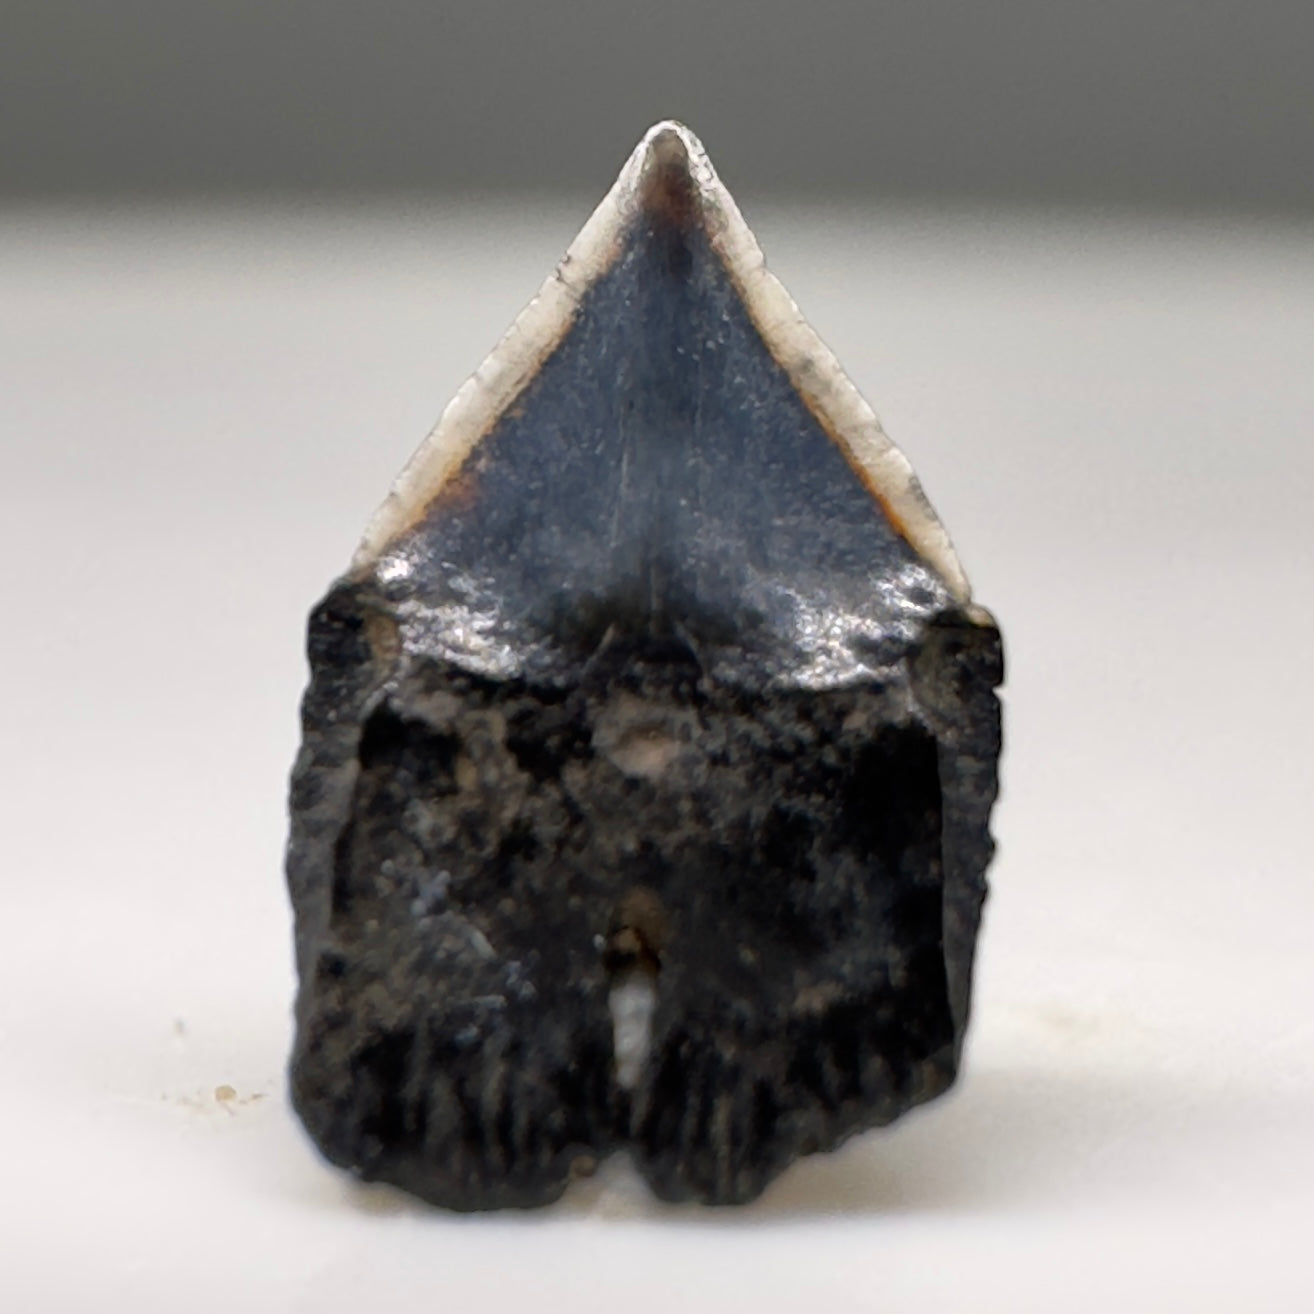 Tiny 5.83mm Fossil Isitius brasiliensis - Cookiecutter Tooth from North Port, FL R523 - Back